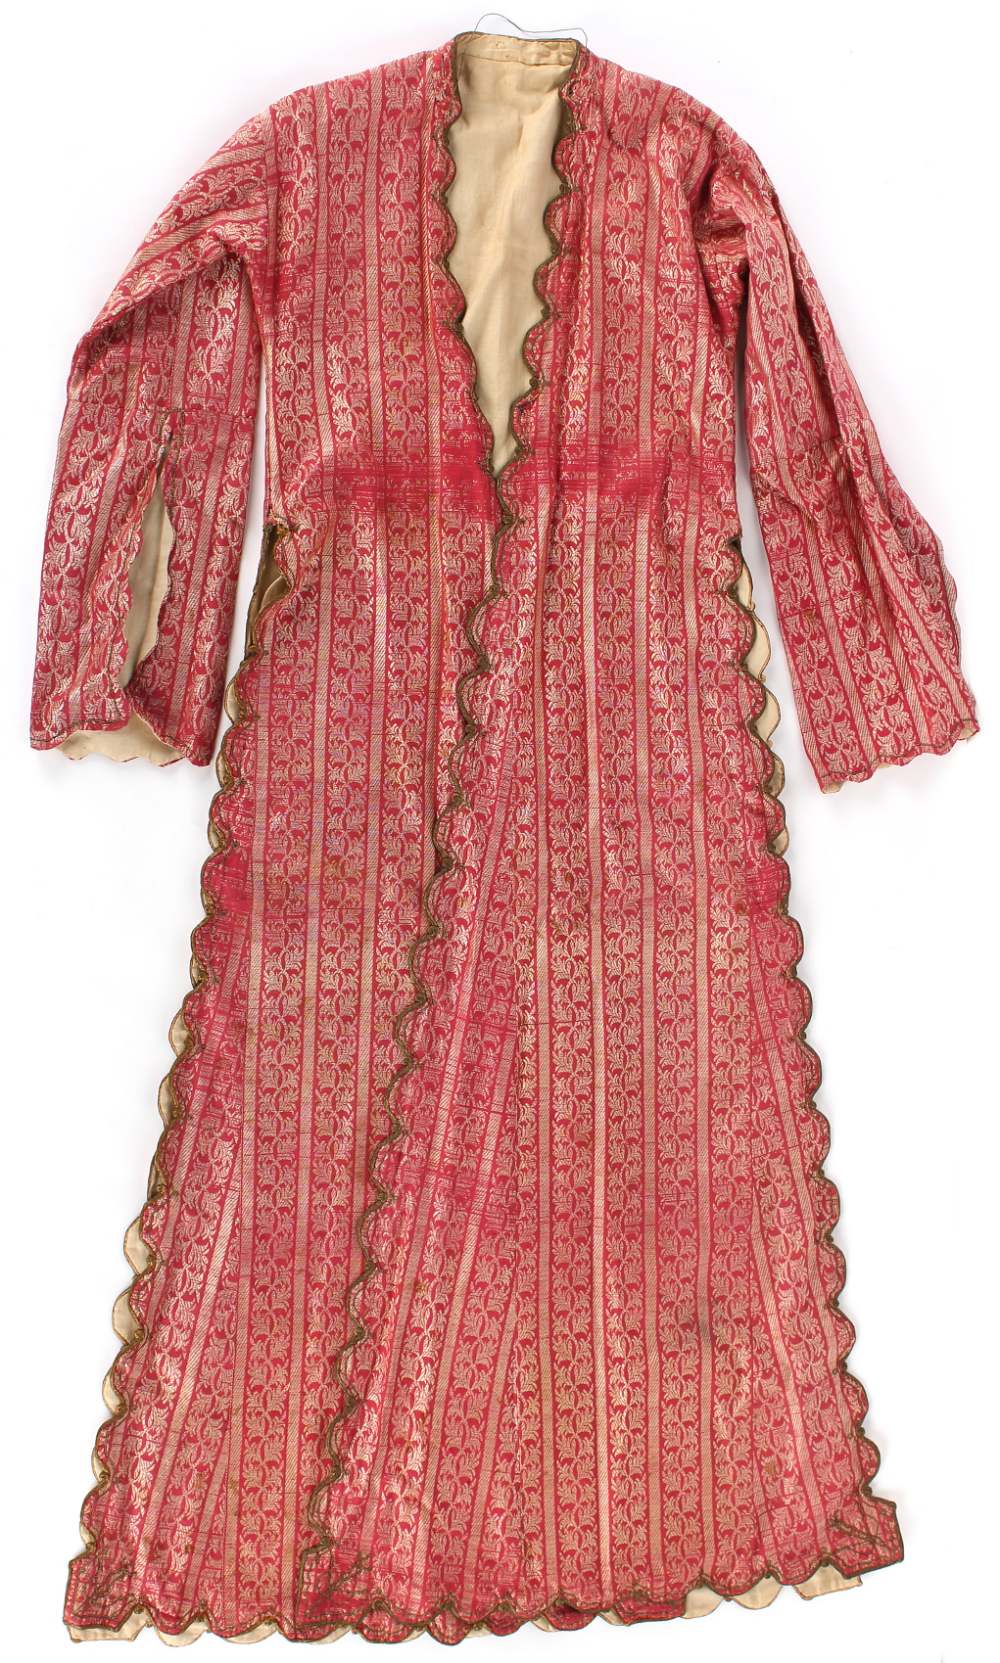 Property of a gentleman - an early 20th century Ottoman red silk robe, anteri, with couched gilt